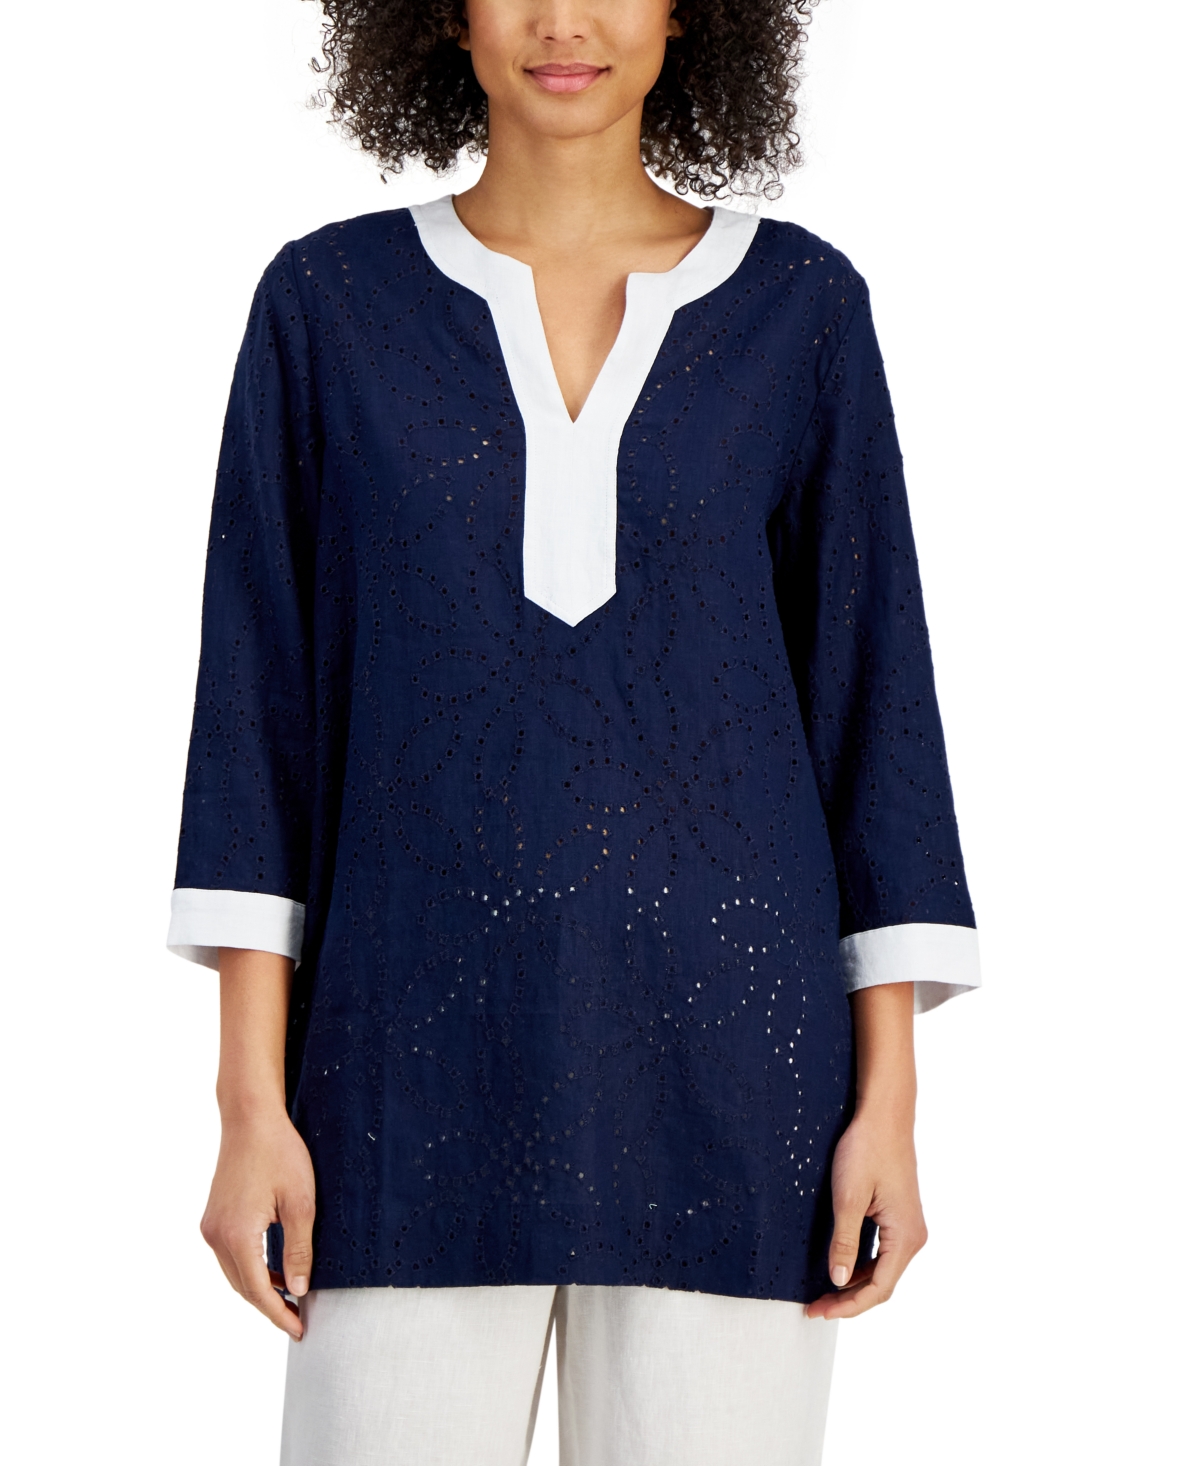 100% Linen Petite Colorblocked Eyelet 3/4 Sleeve Tunic Top, Created for Macy's - Intrepid Blue